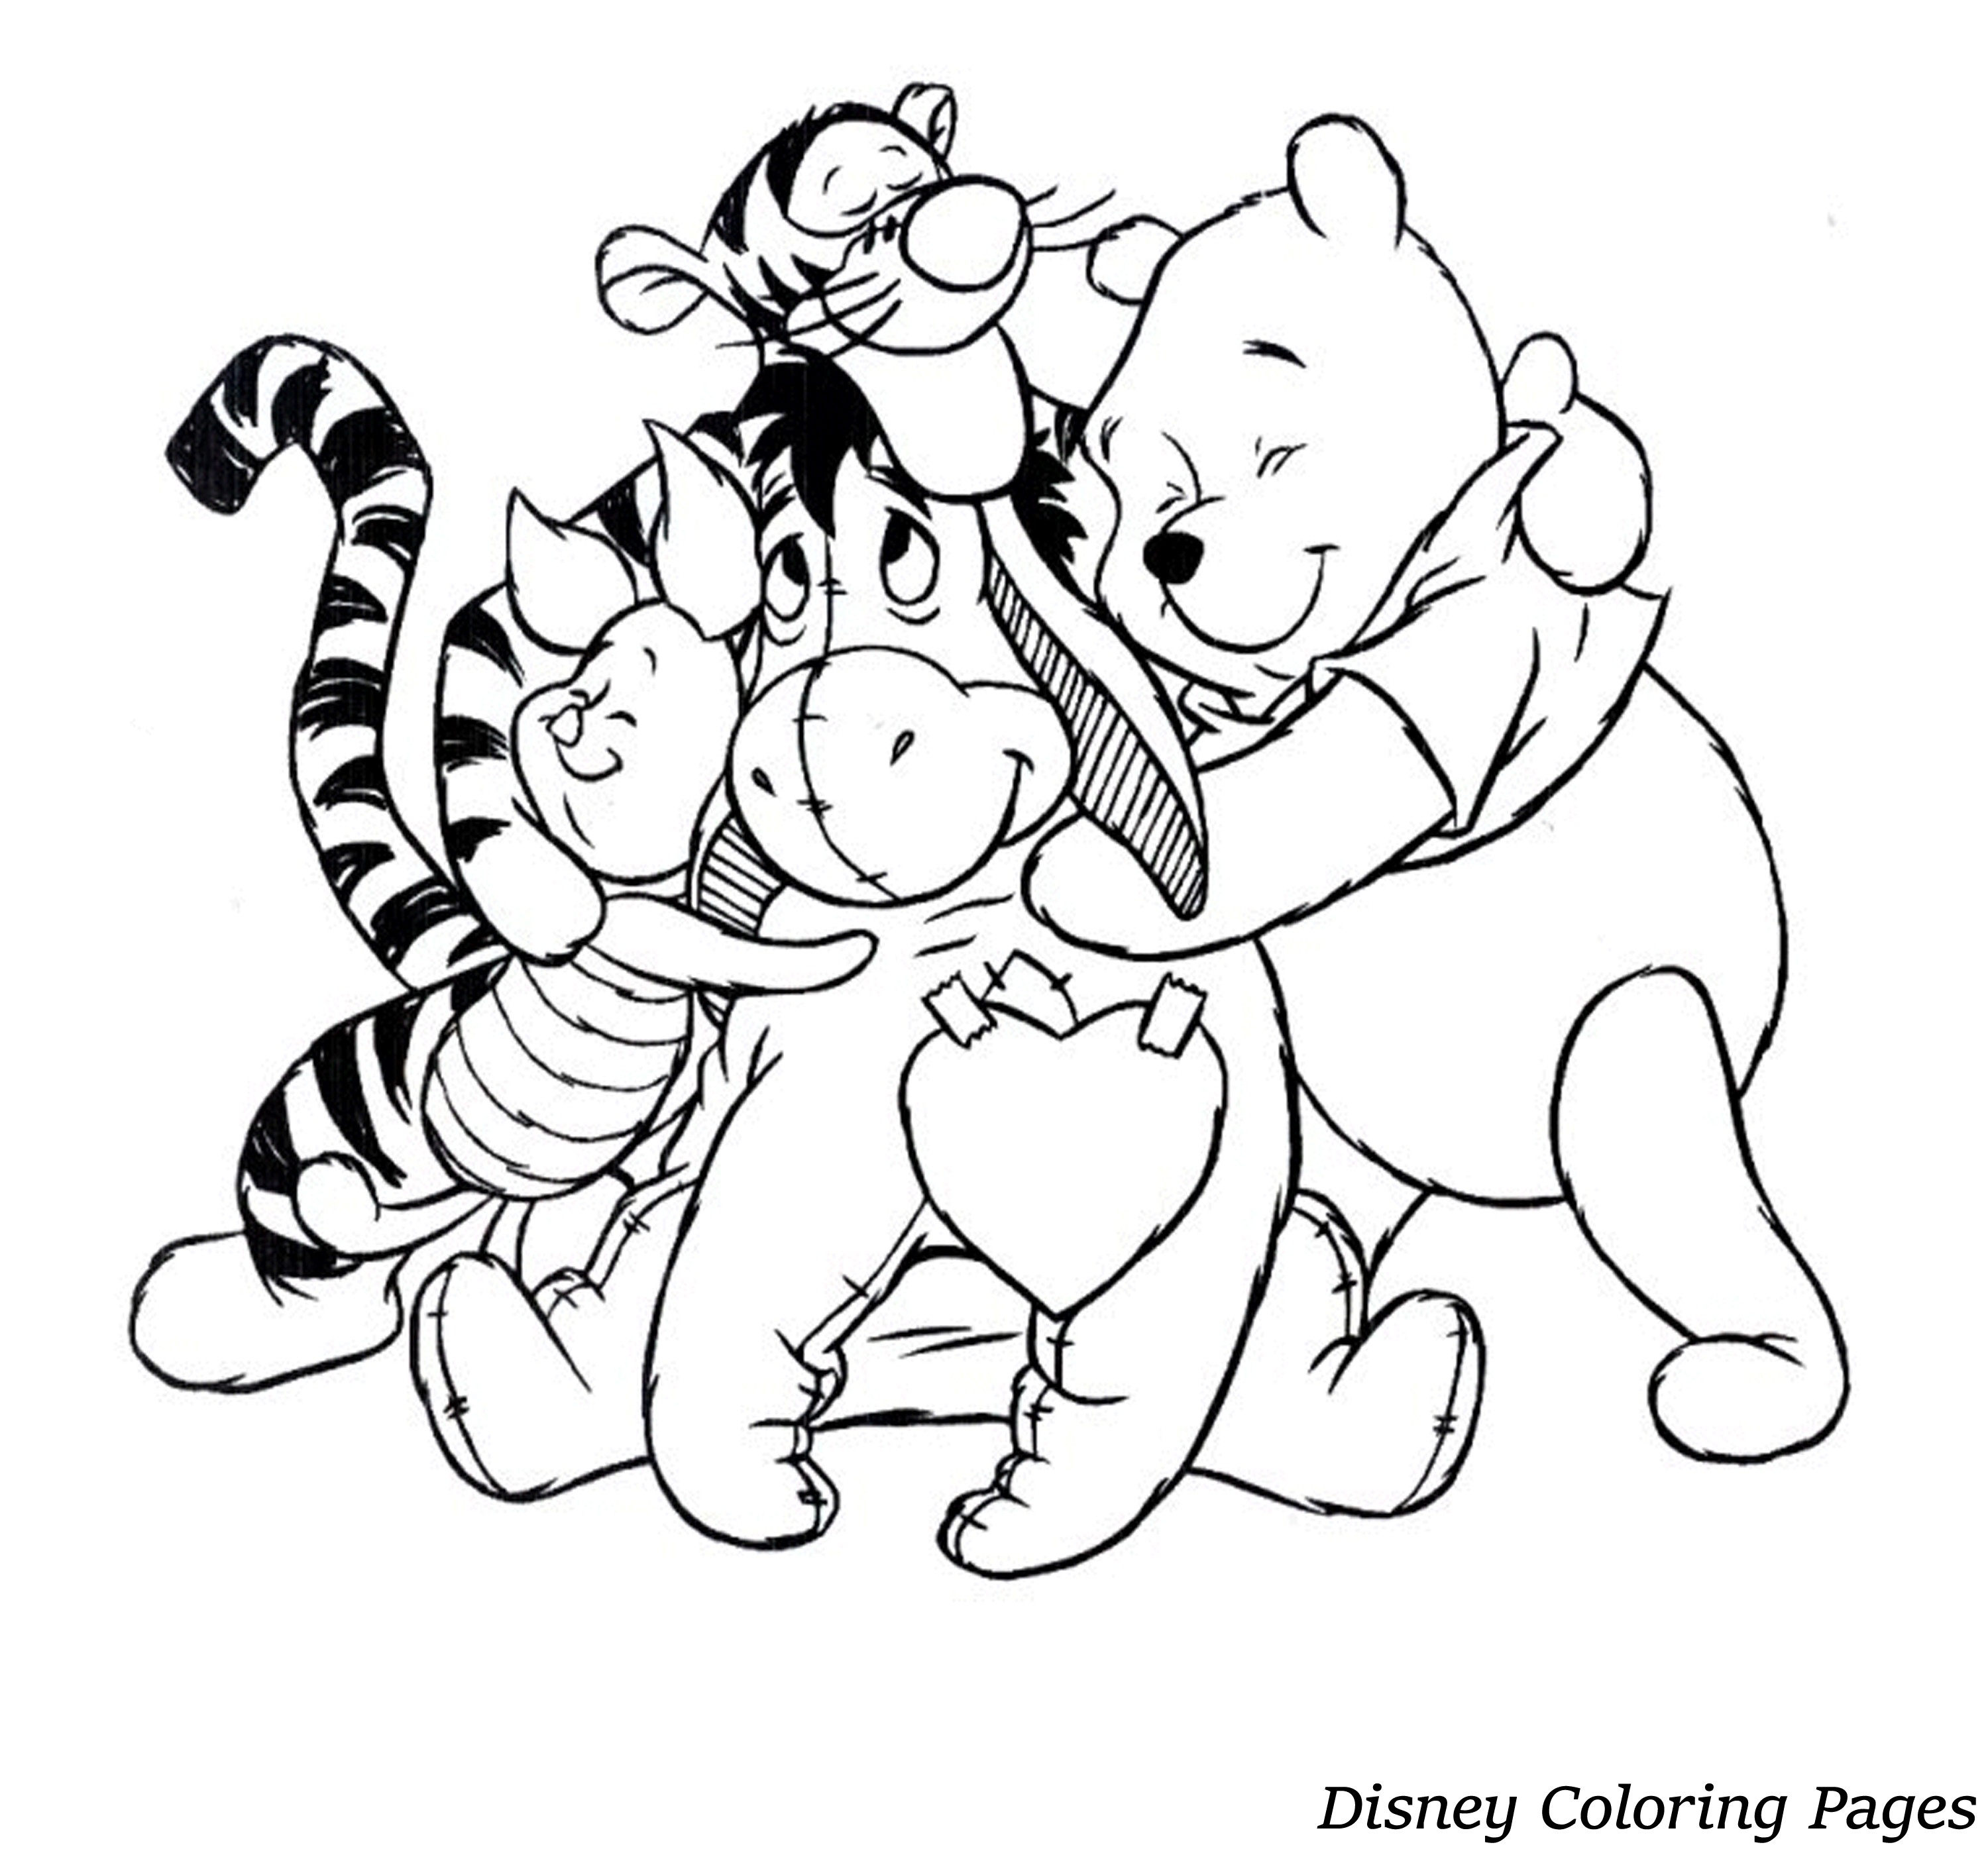 Disney Color Pages Free Coloring Pages Free Disney Coloring Pages For Kids Tot Outtable